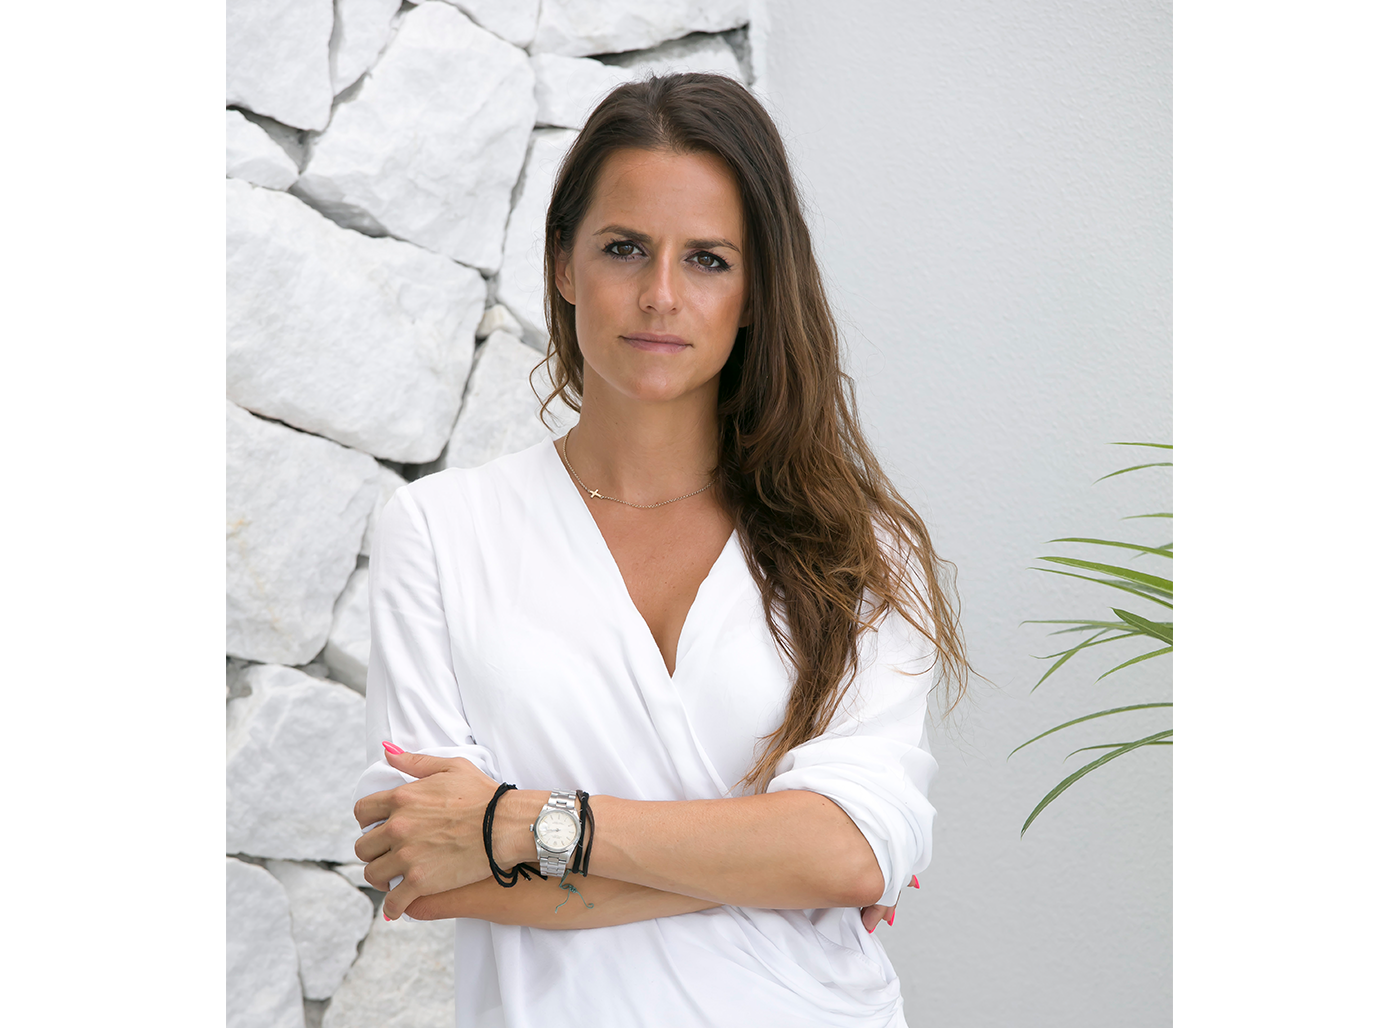 ICONS: Lucía Casaus, the interior architect partner and co-founder of GC Studio in Marbella. Designing luxury property is no longer about following trends; it has become far more personal than that, says Lucia Casaus, the co-owner of the architectural and interior design practice GC Studio.